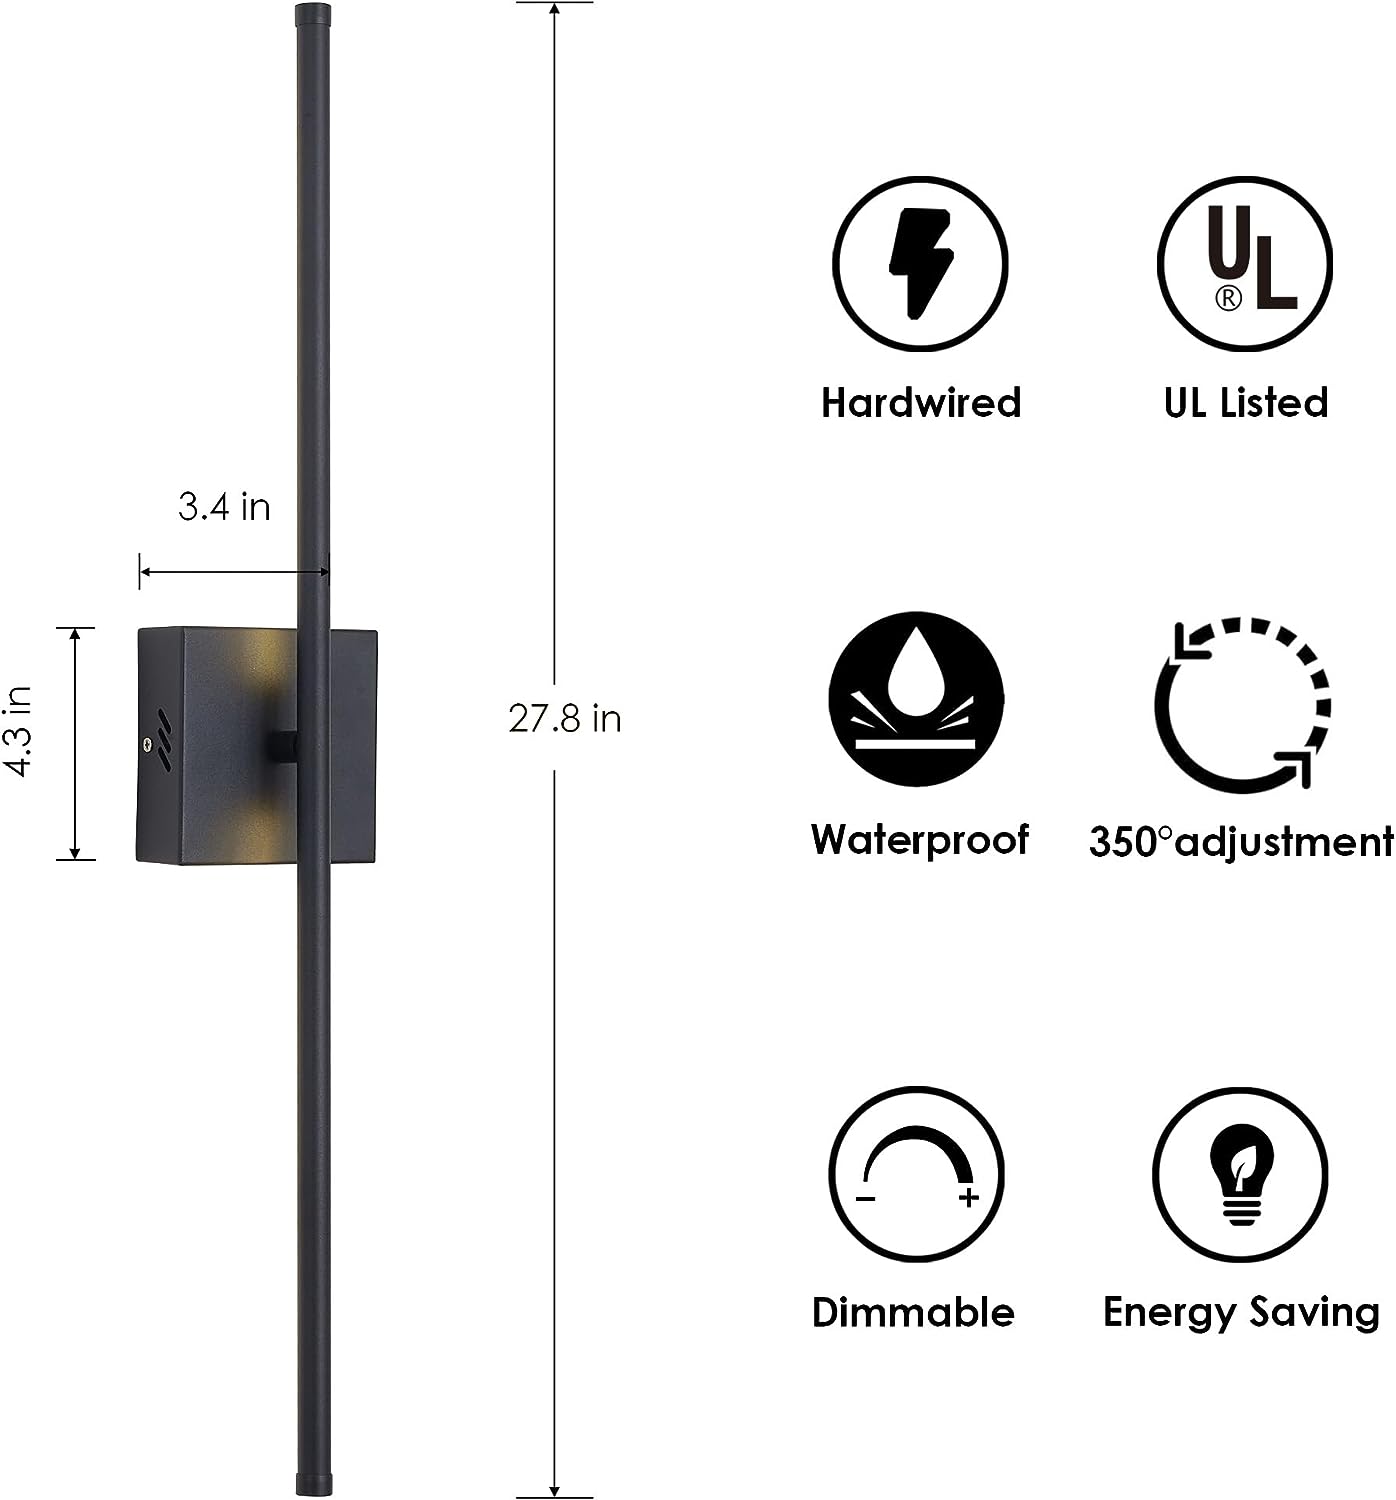 KARTOOSH Modern Wall Sconces Set of Two, Dimmable Hardwired Wall Sconces, 350 Rotate, LED Matte Black Wall Light Fixtures, 3000K Warm Light Wall Lamp for Bathroom, Living Room, 27.8 Inch (